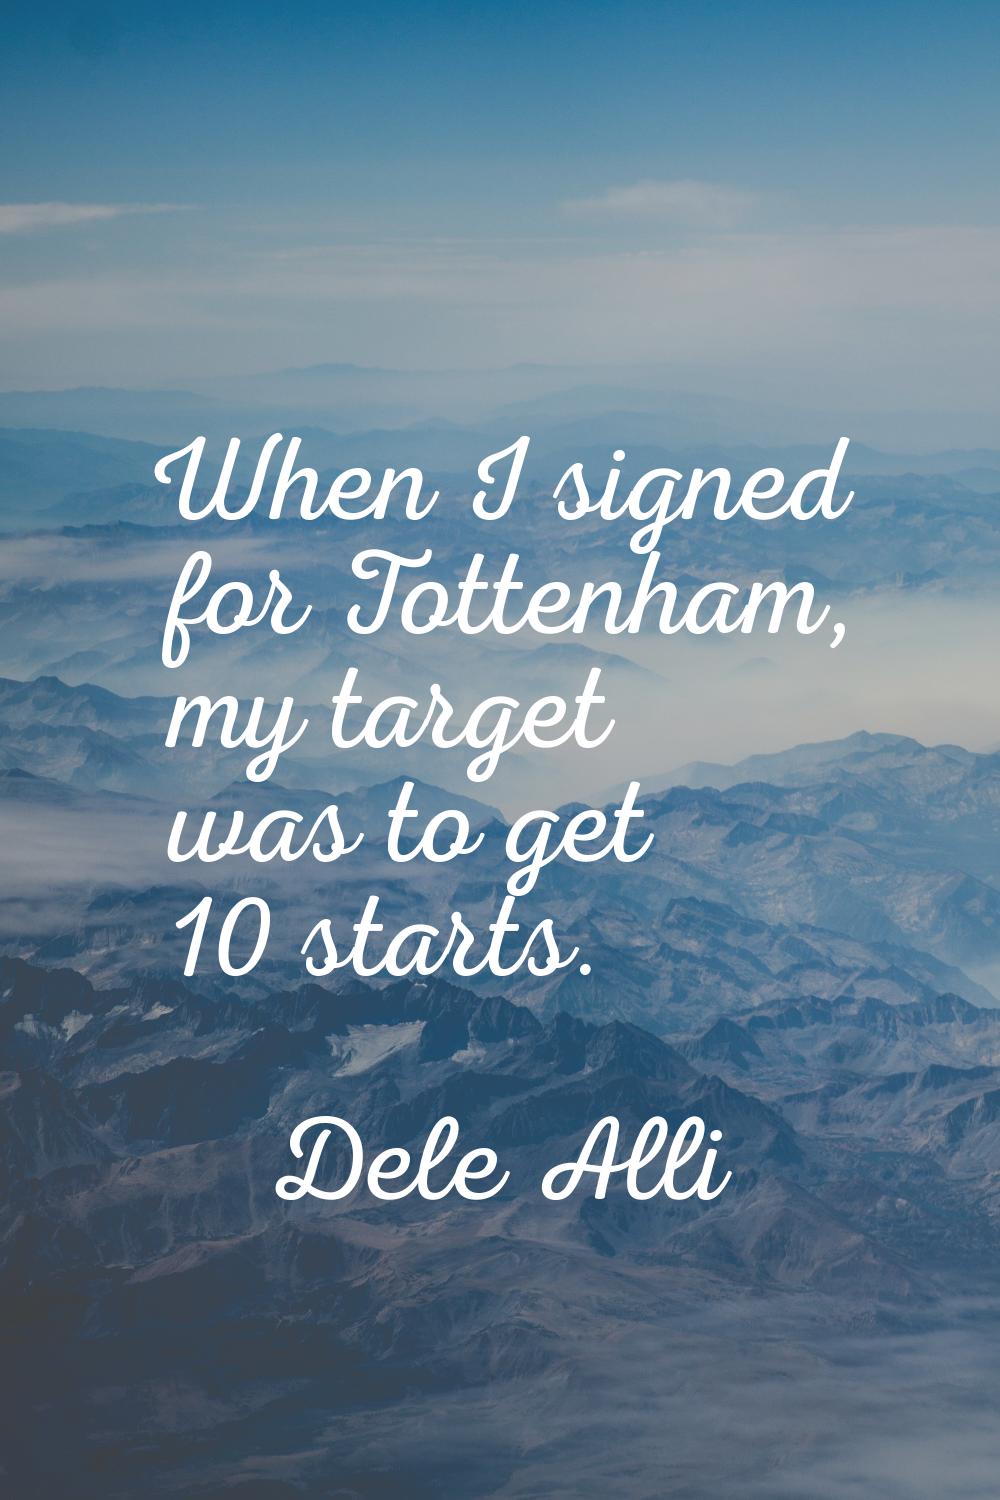 When I signed for Tottenham, my target was to get 10 starts.